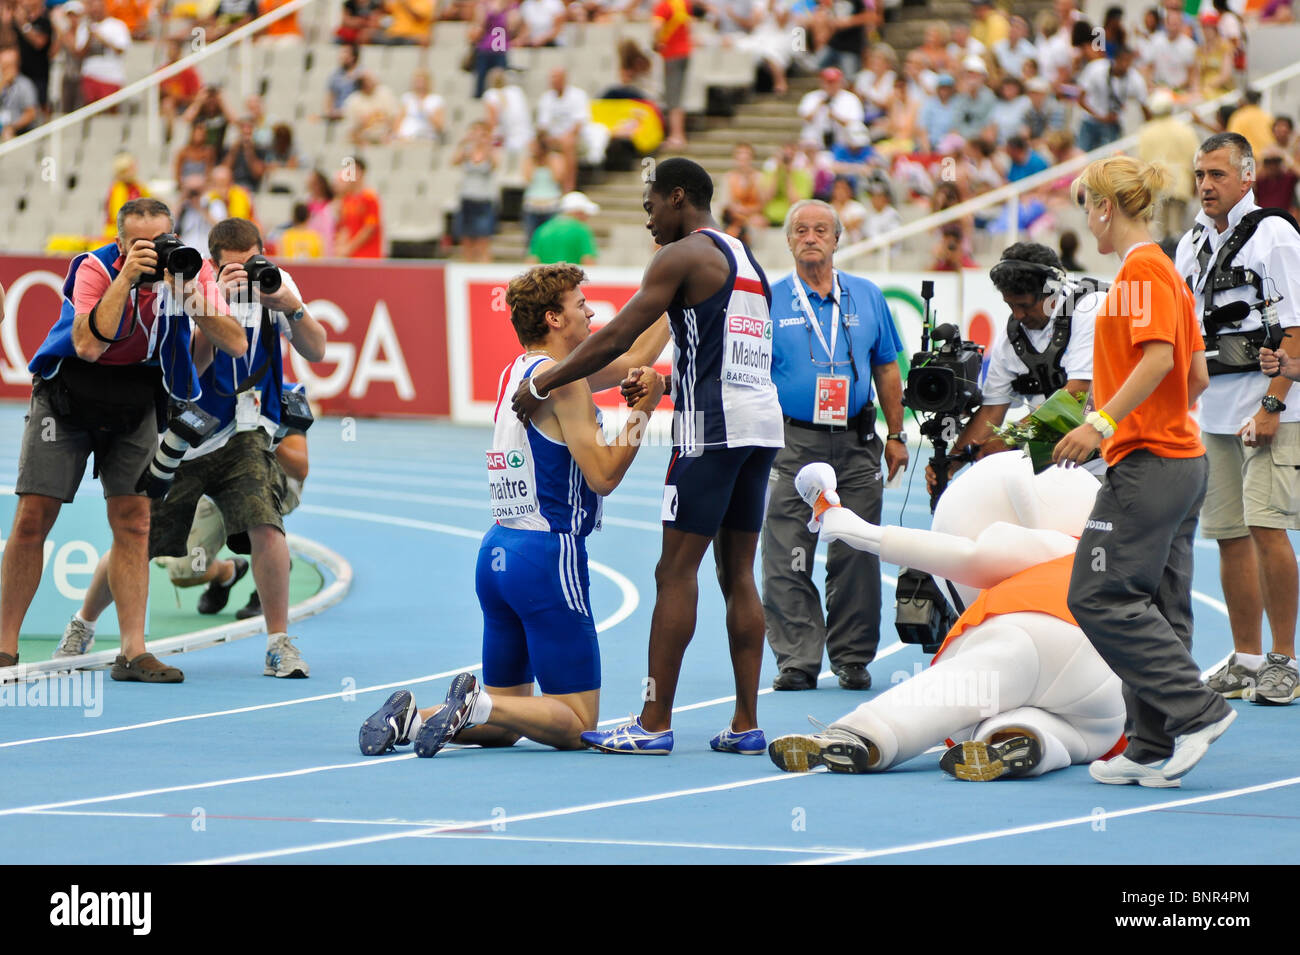 BARCELONA Aug 1st 2010: French athlete Christophe Lemaitre in his 100m victory. Stock Photo